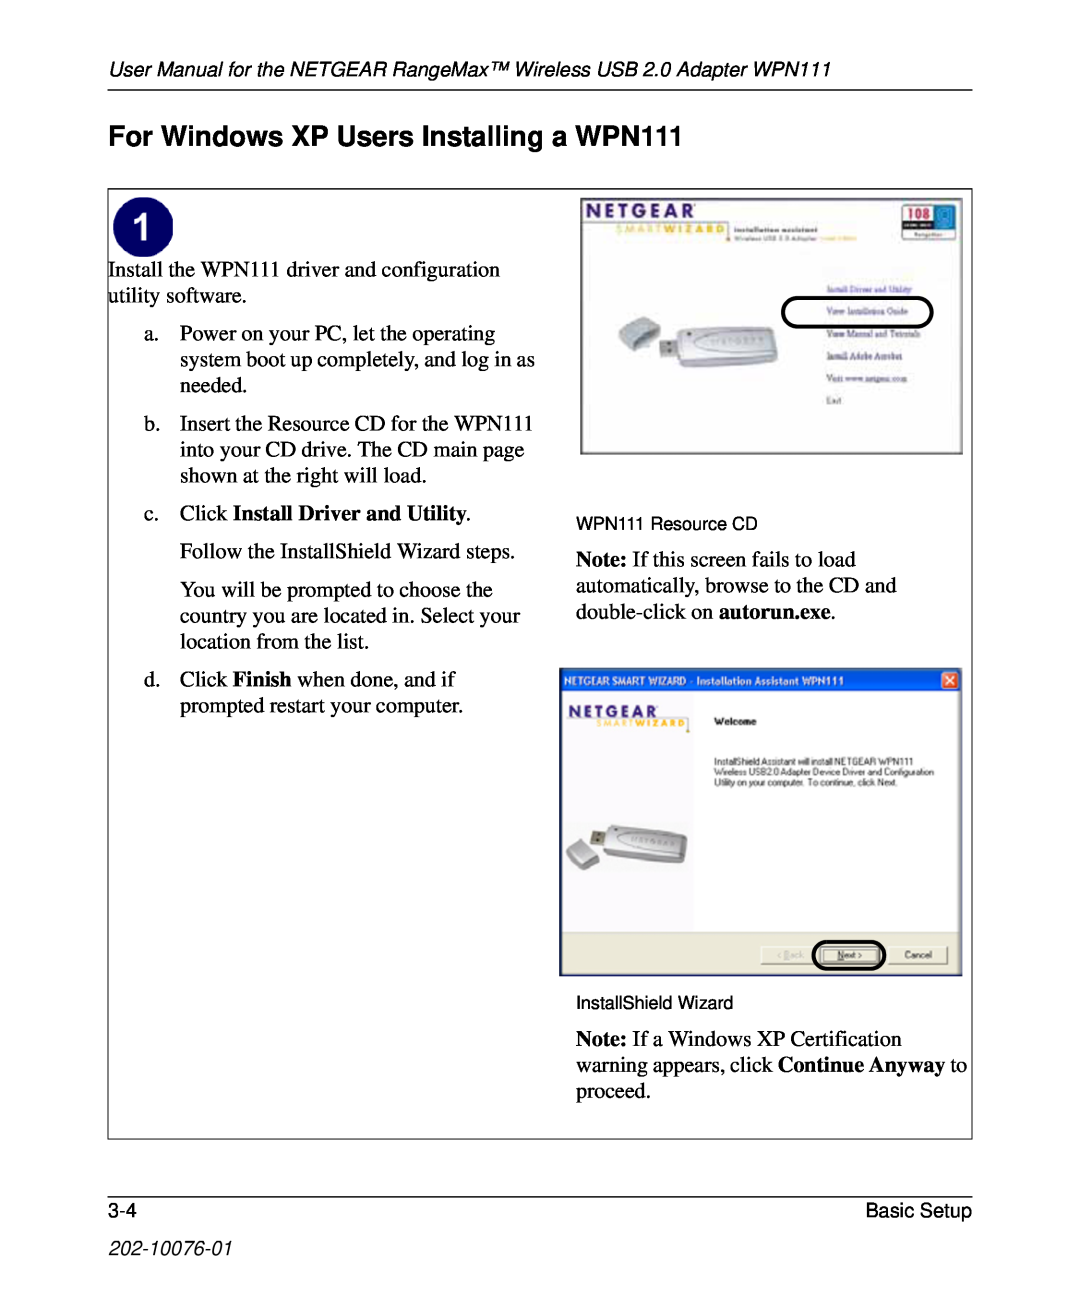 NETGEAR user manual For Windows XP Users Installing a WPN111, c. Click Install Driver and Utility 